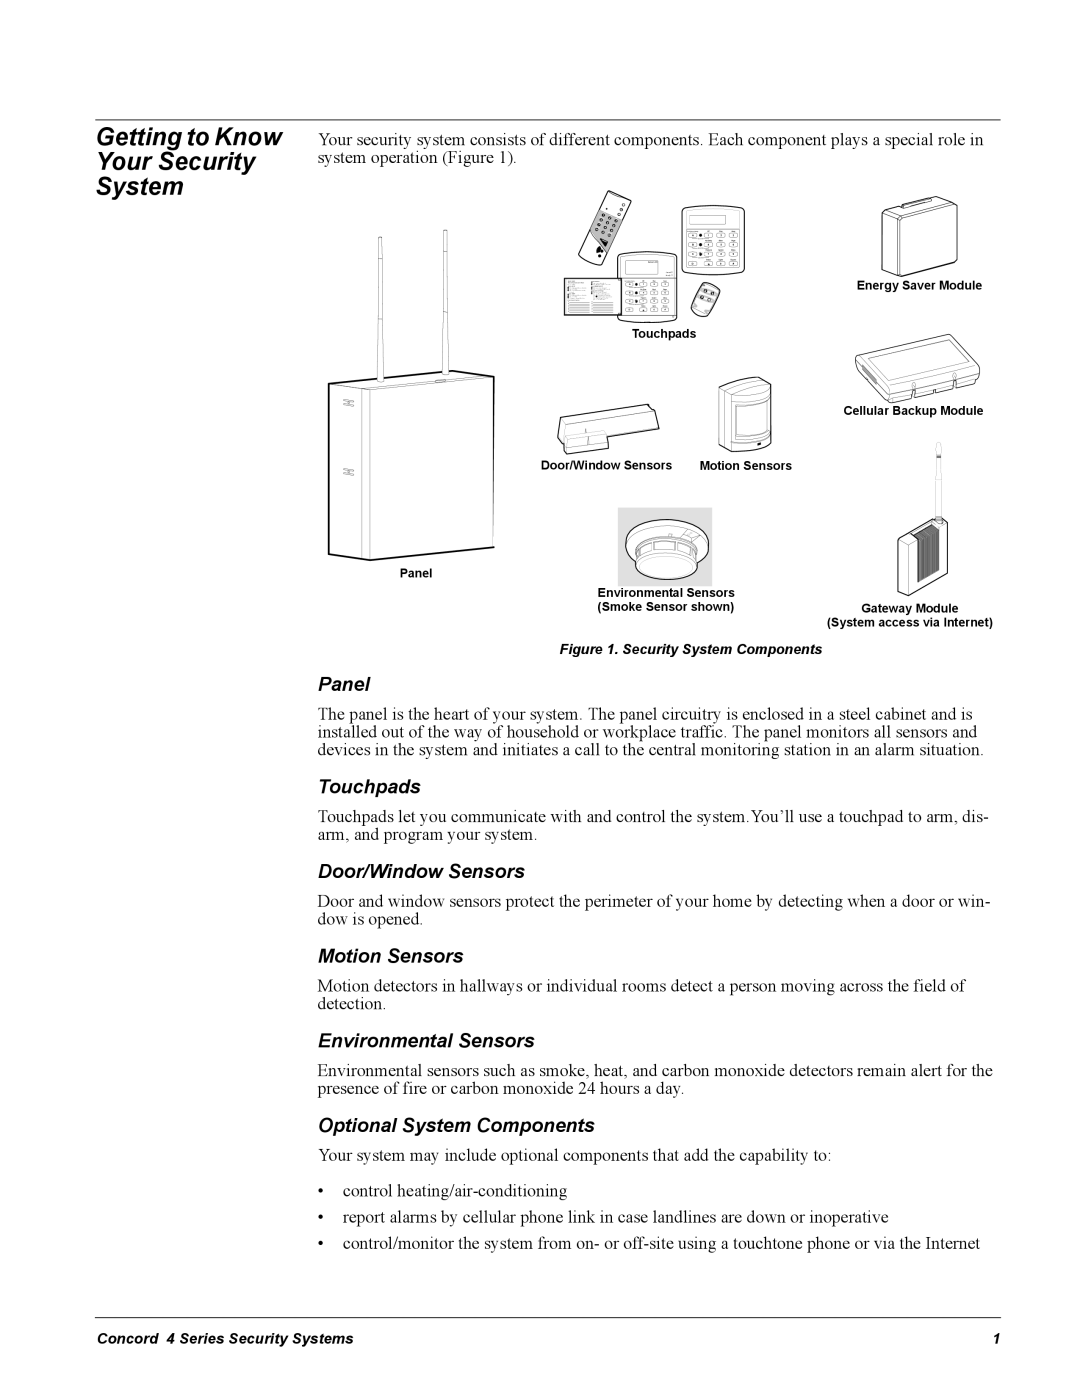 GE Concord 4 manual Getting to Know Your Security System, Panel, Touchpads, Door/Window Sensors, Motion Sensors 